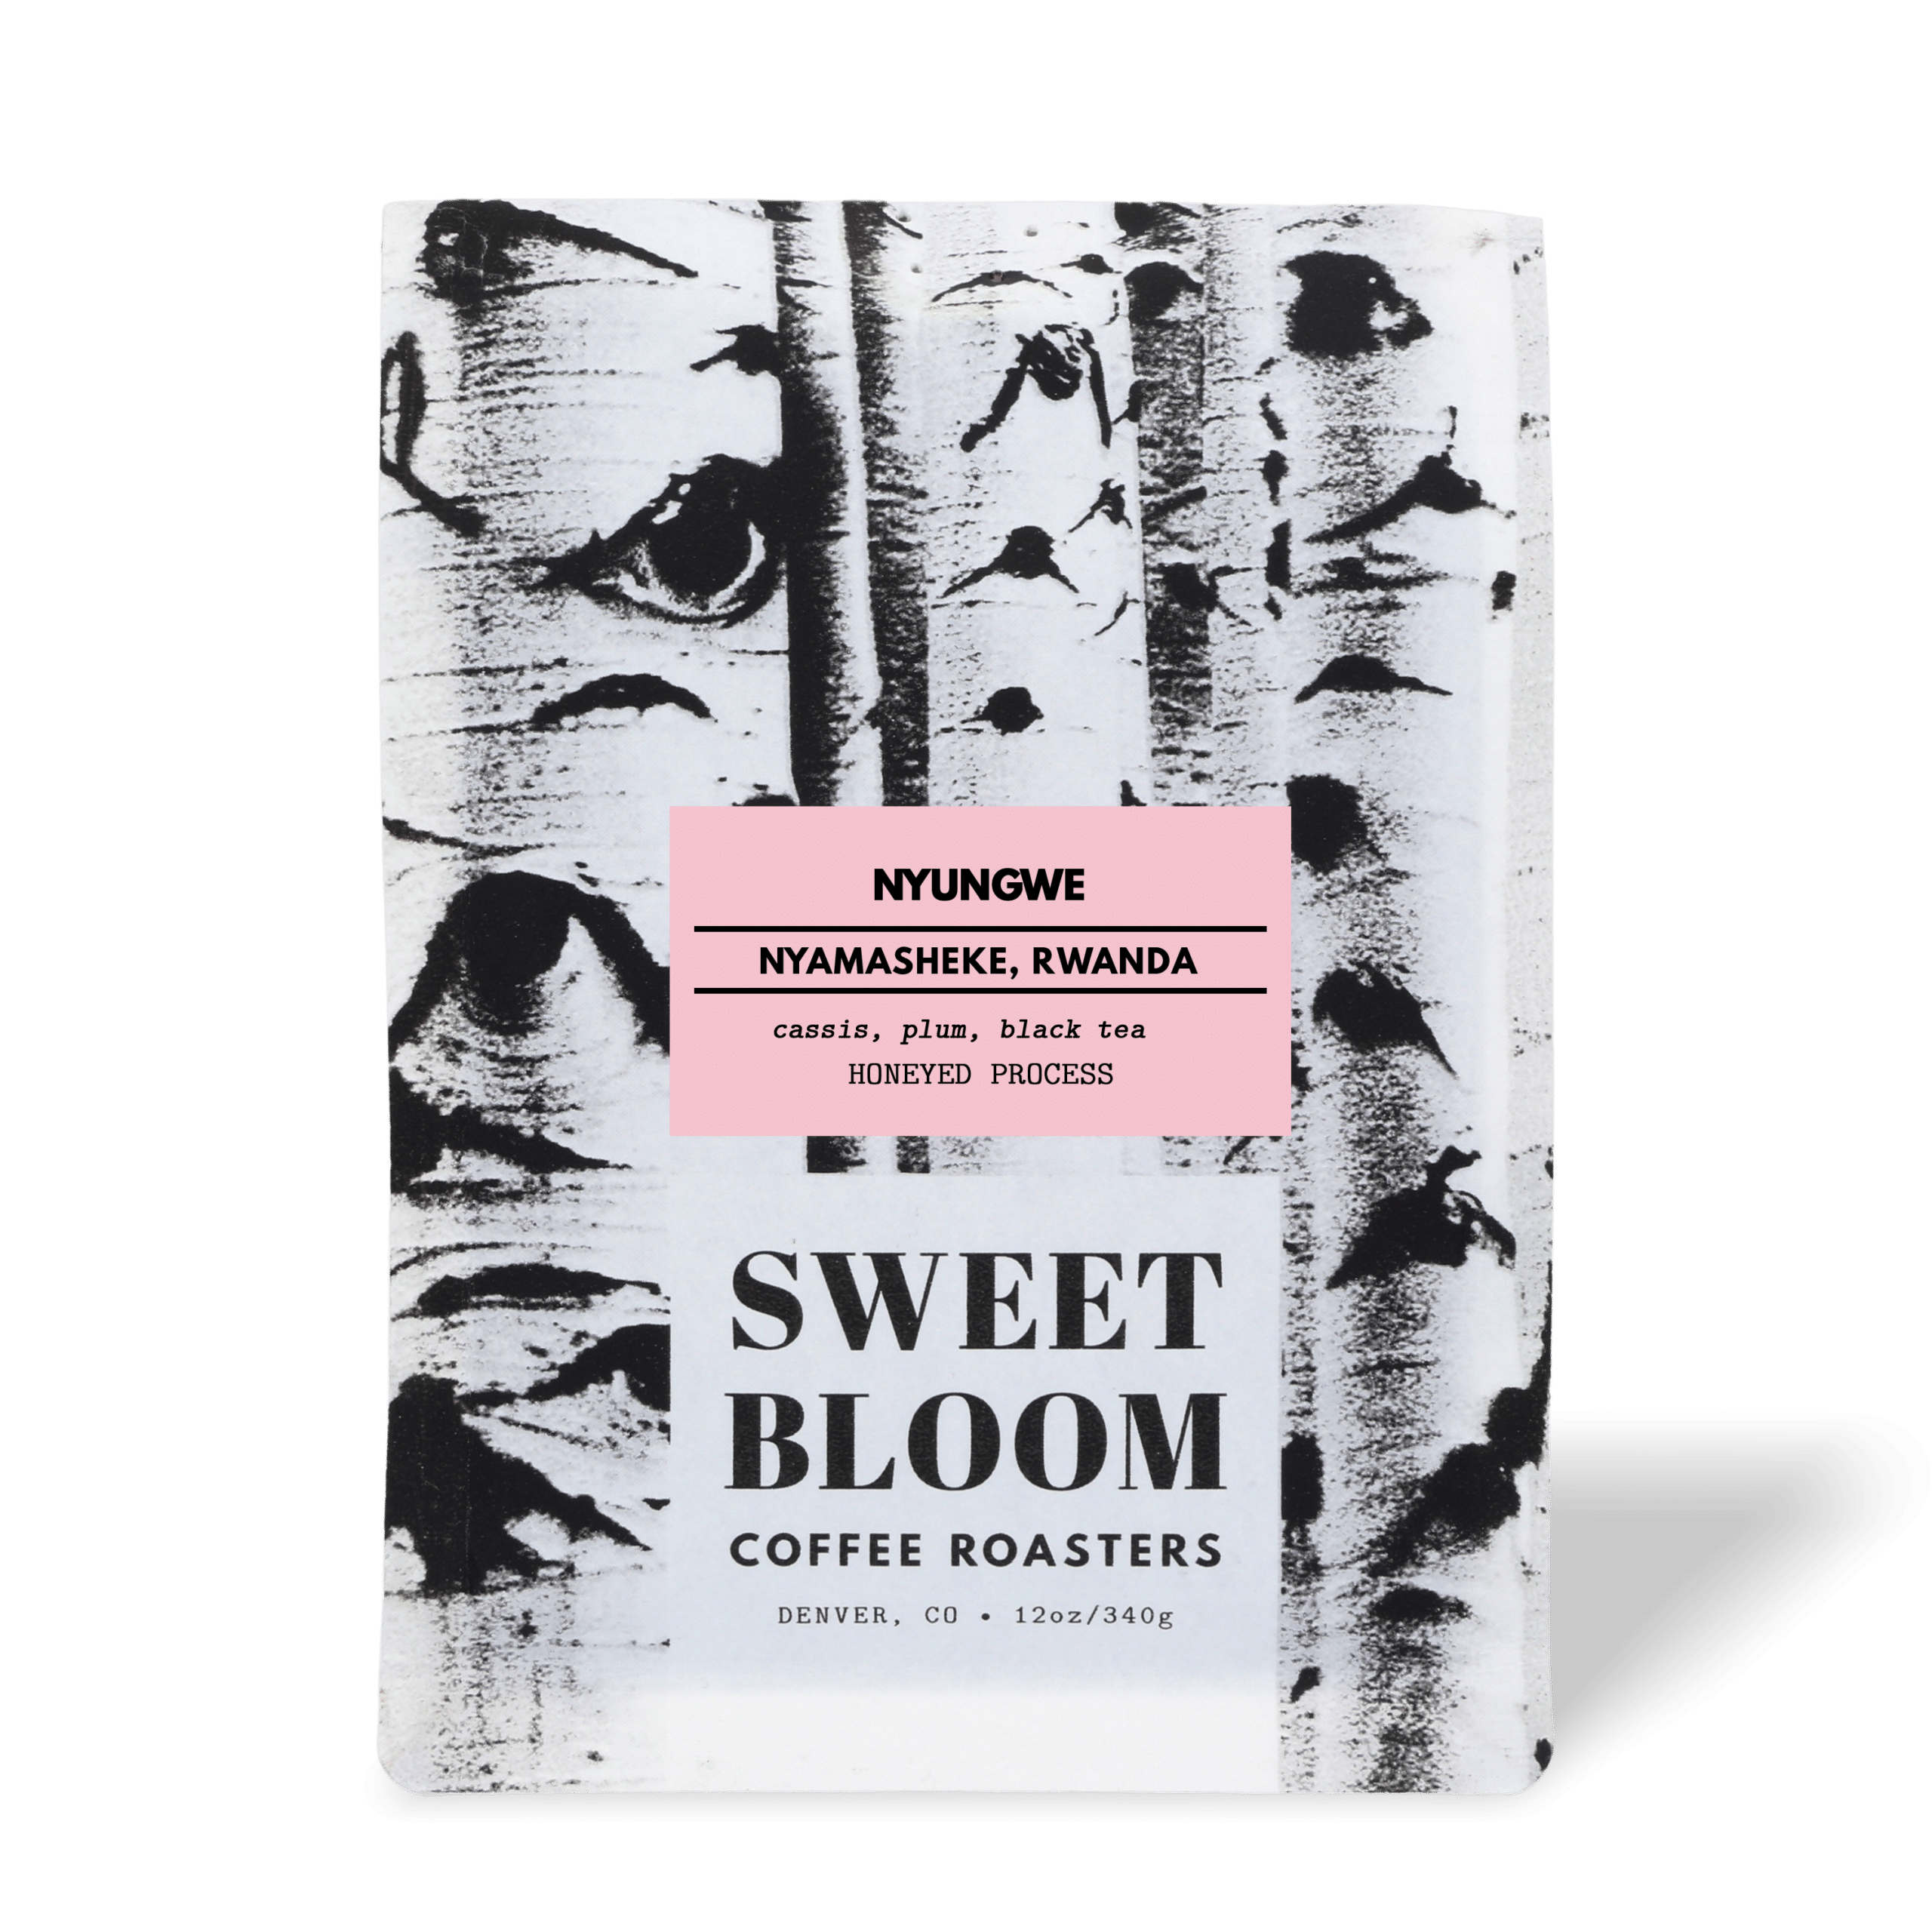 https://sweetbloomcoffee.com/wp-content/uploads/2023/03/sweet-bloom-nyungwe-23-1.png